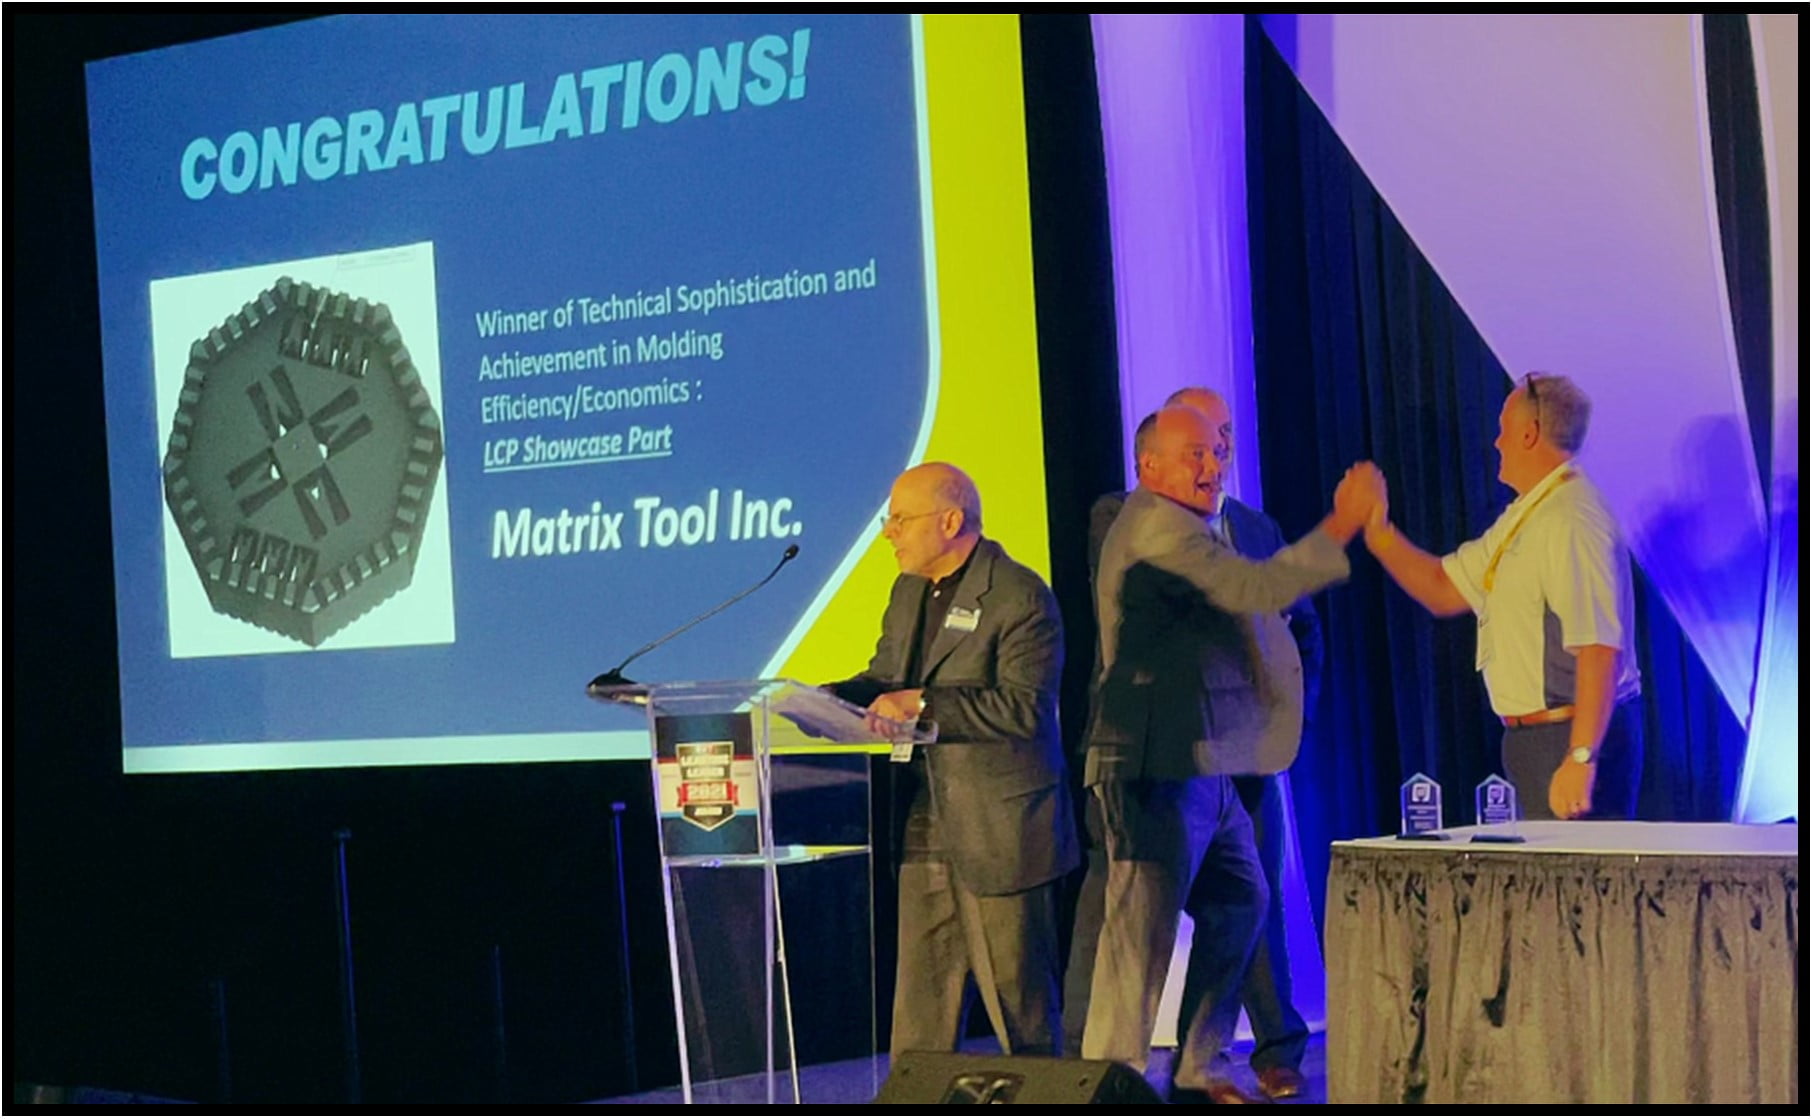 Image of Matrix Tool Winning the Plastics Technology Hot Shots contest - The parts contest was broken down into two main categories: technical sophistication and high efficiencies/economics - Matrix Tool’s lone entry won both awards!